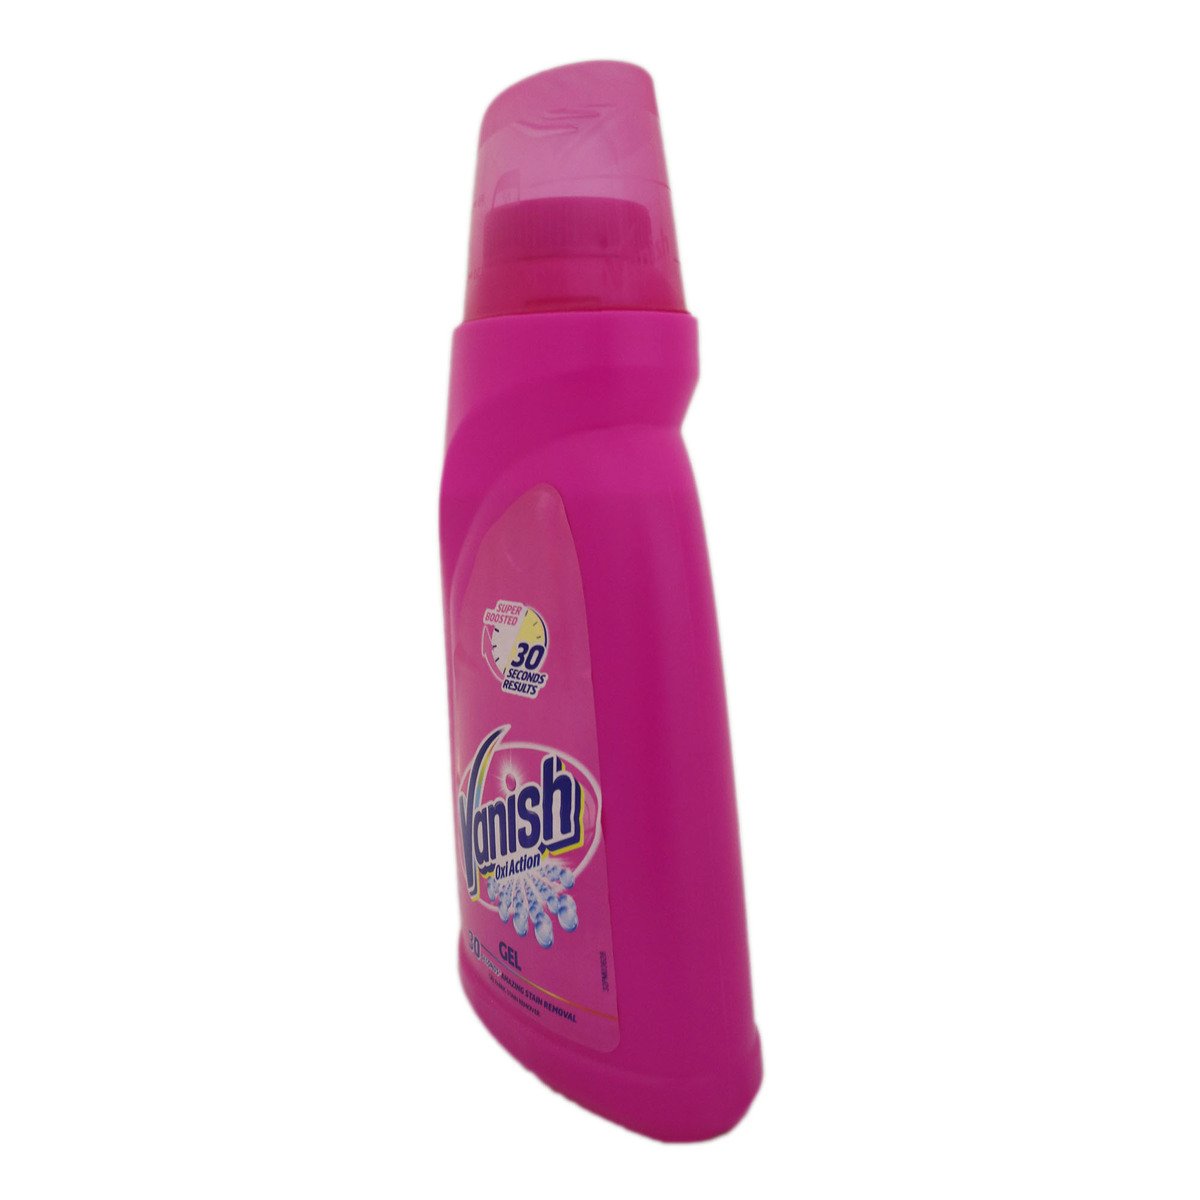 Vanish Fabric Stain Remover Gel 1Litre